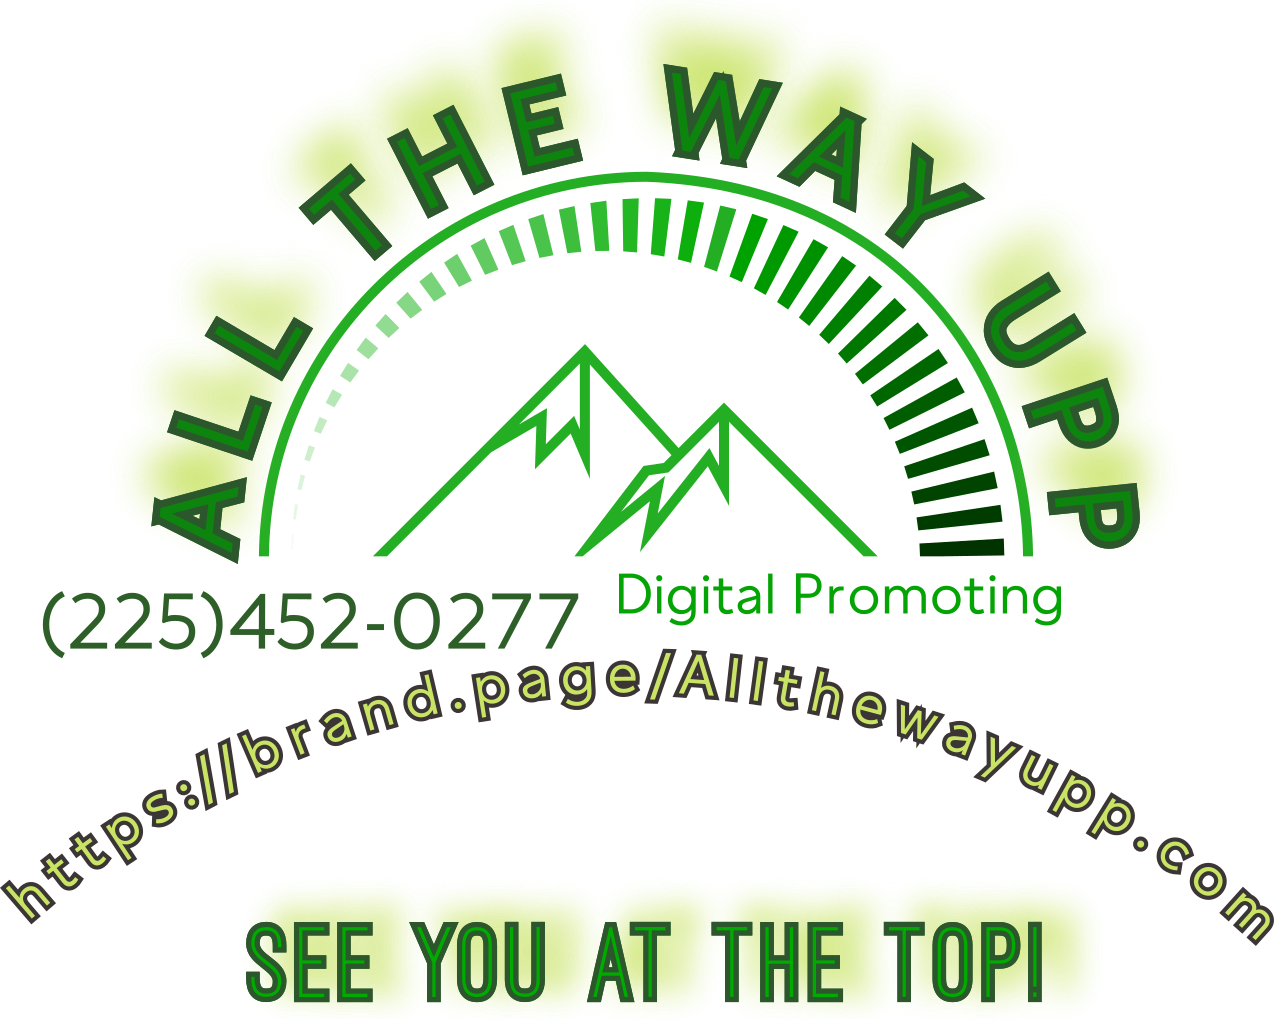 ALL THE WAY UP's logo